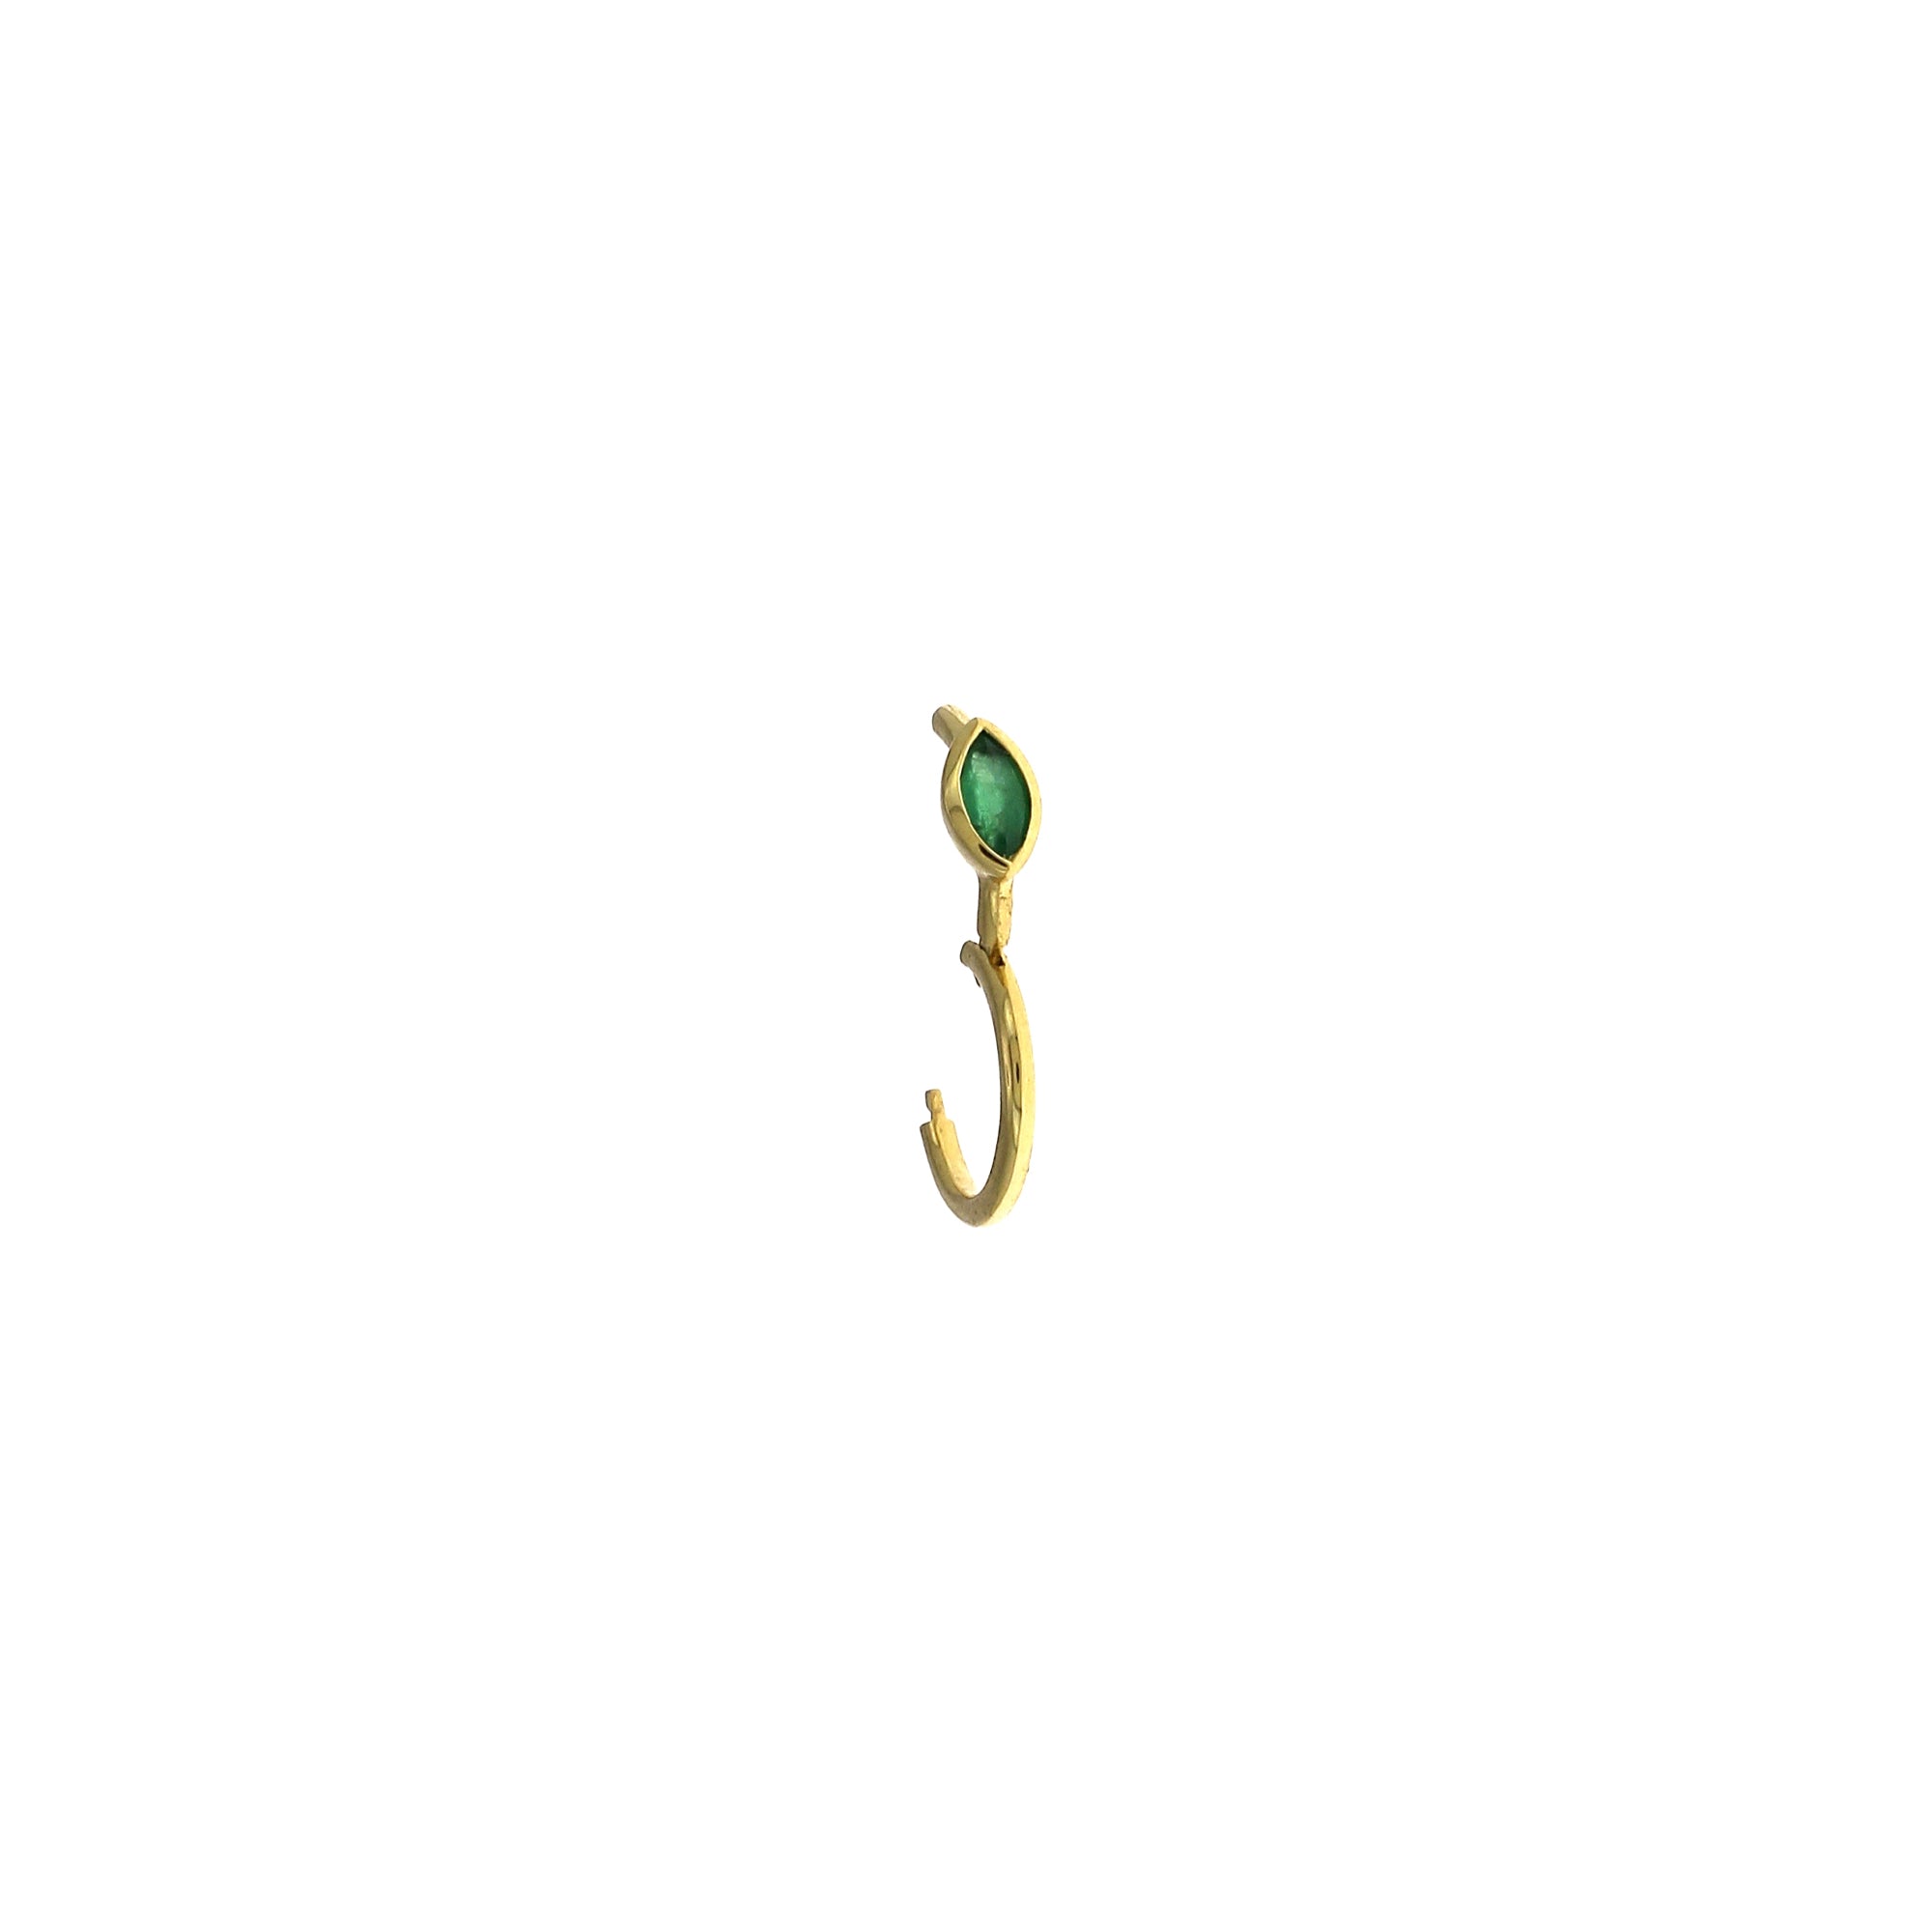 6.5mm Marquise Emerald 3x2mm Yellow Gold Hoop